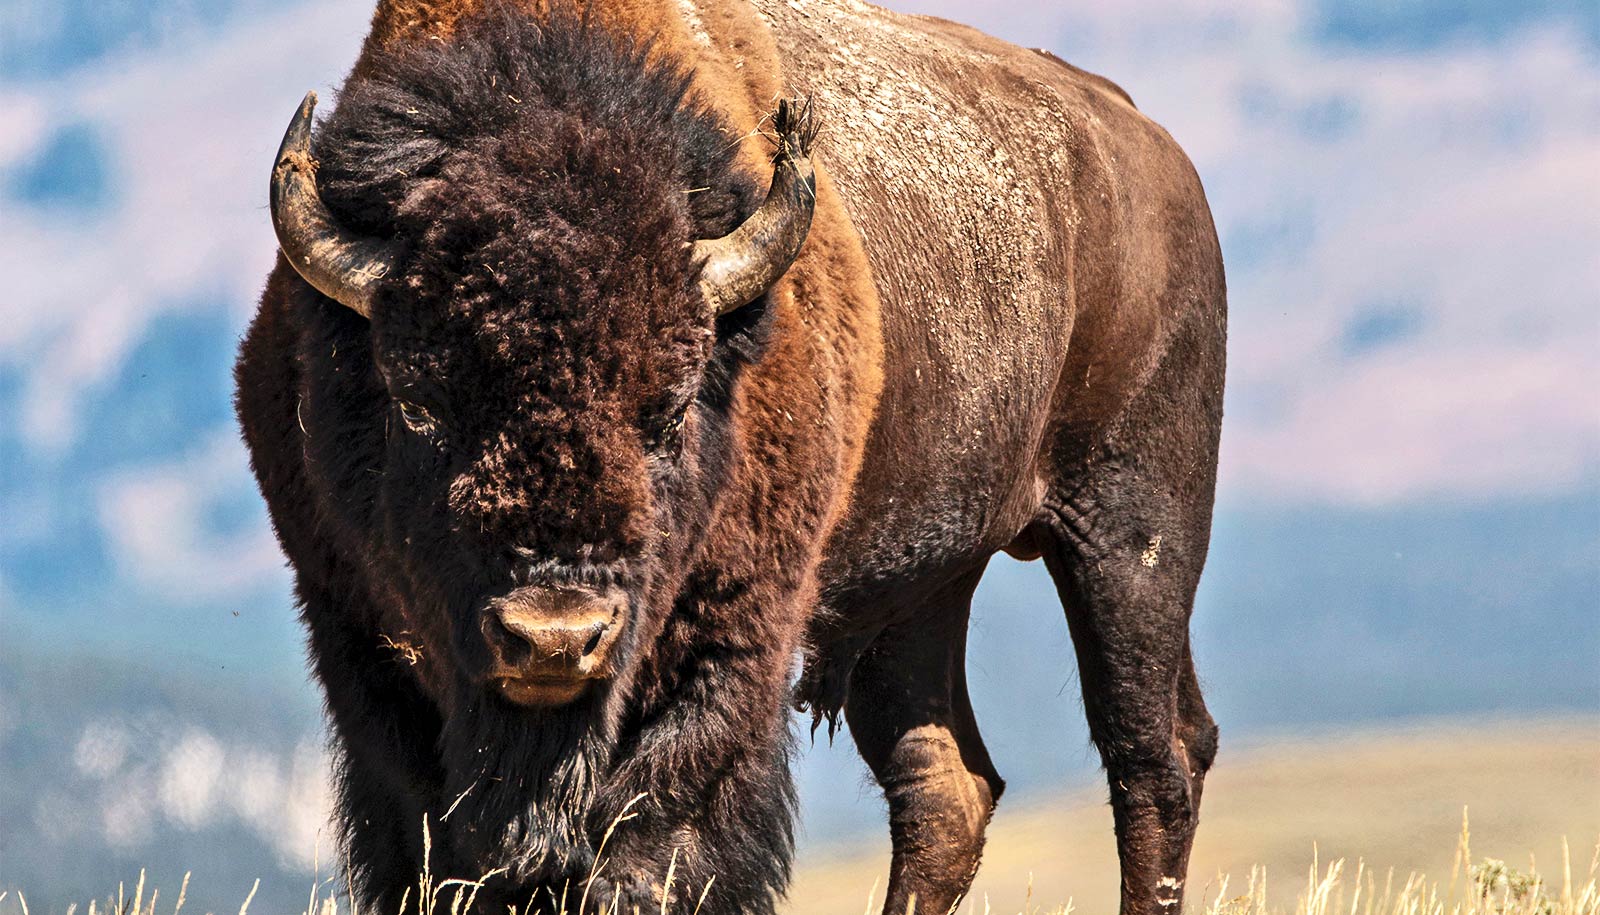 A bison stands alone on a field of yellow grass with mountains in the background.